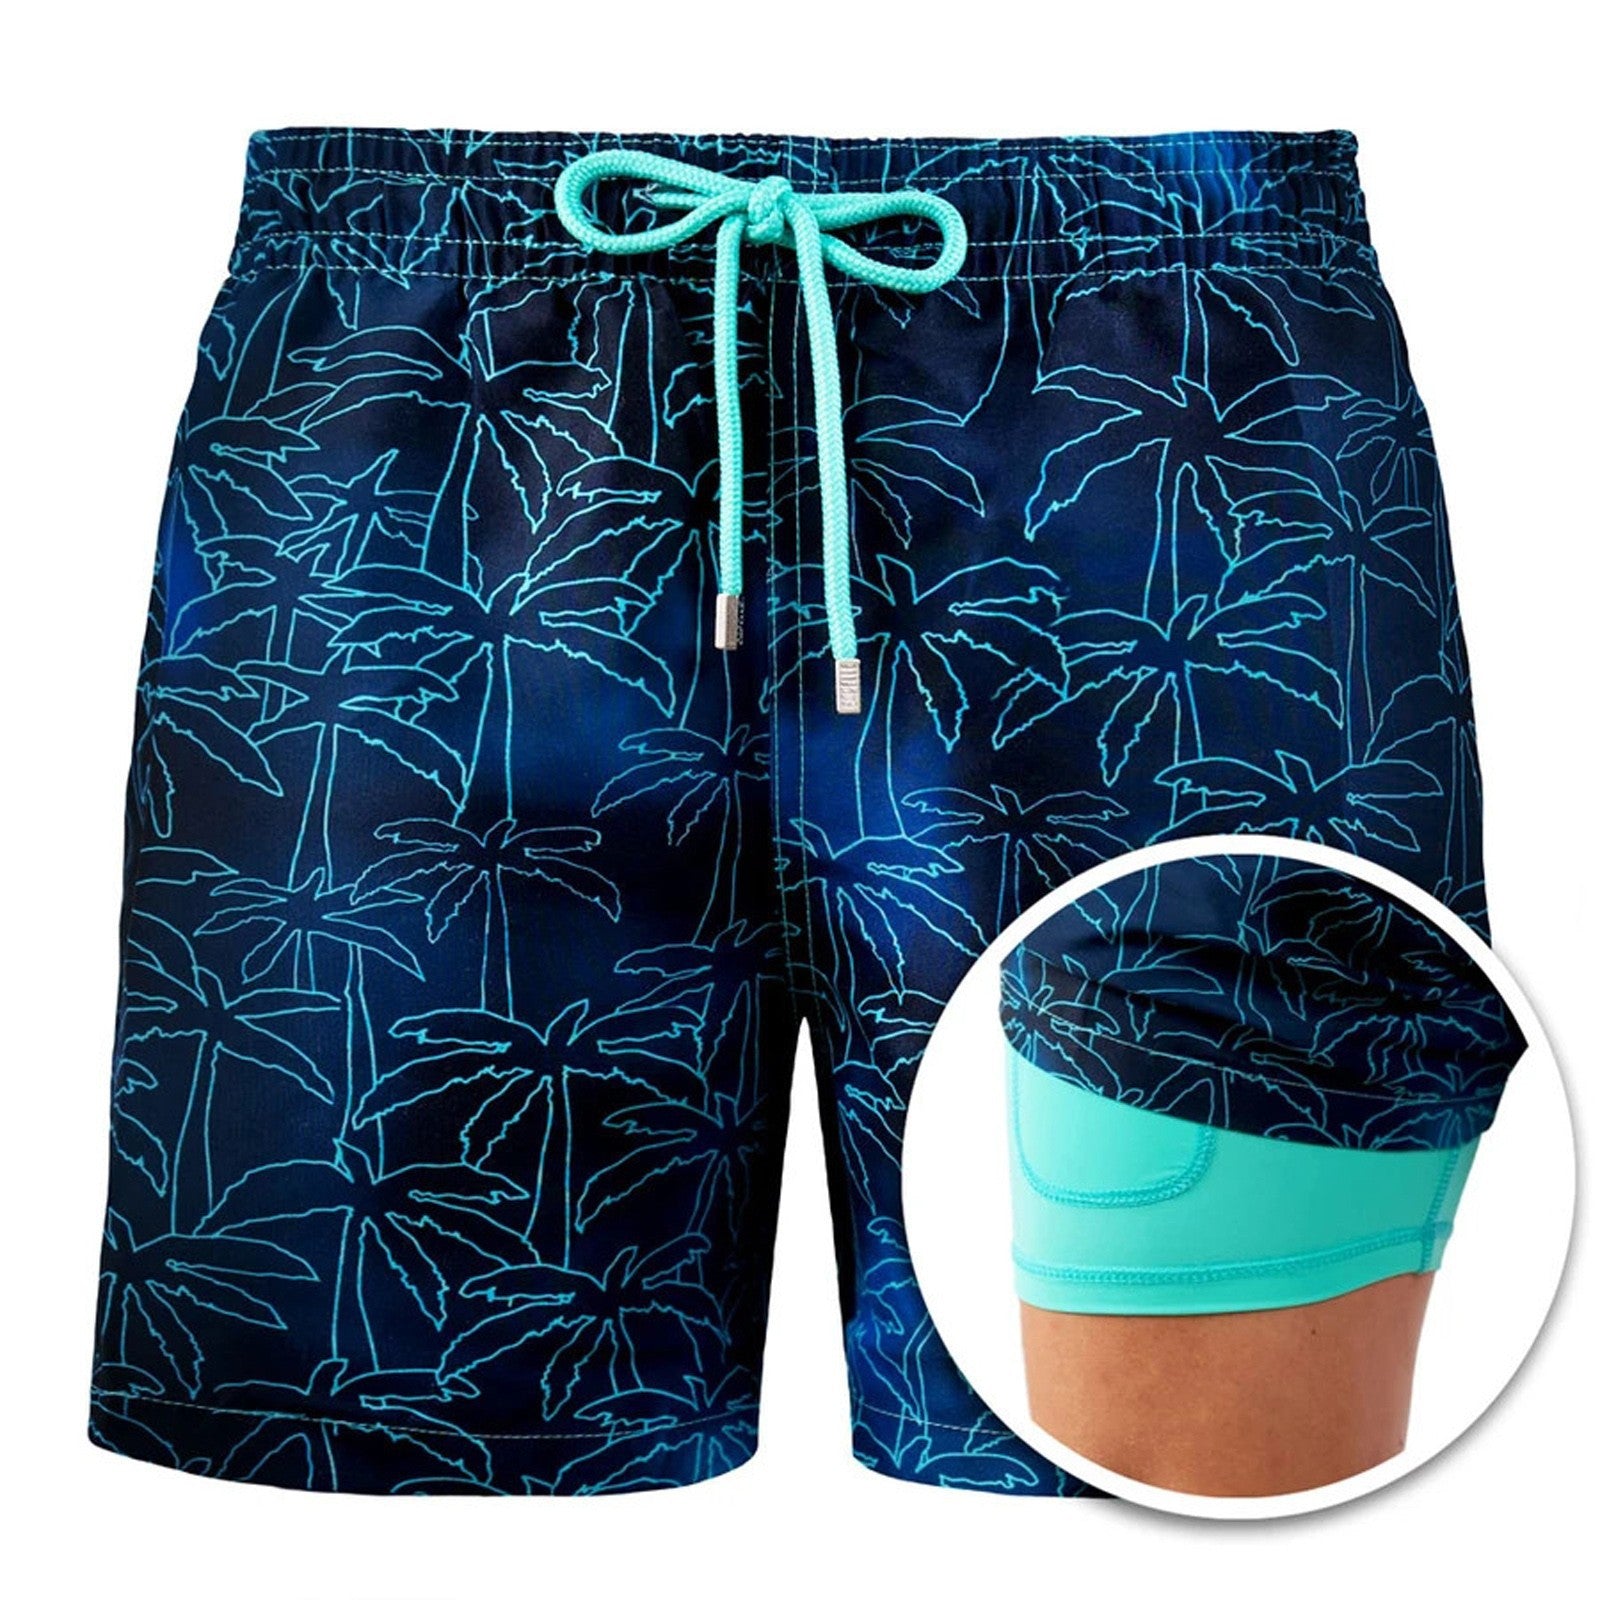 Coconut grove -Mens Swim Trunks with Compression Liner